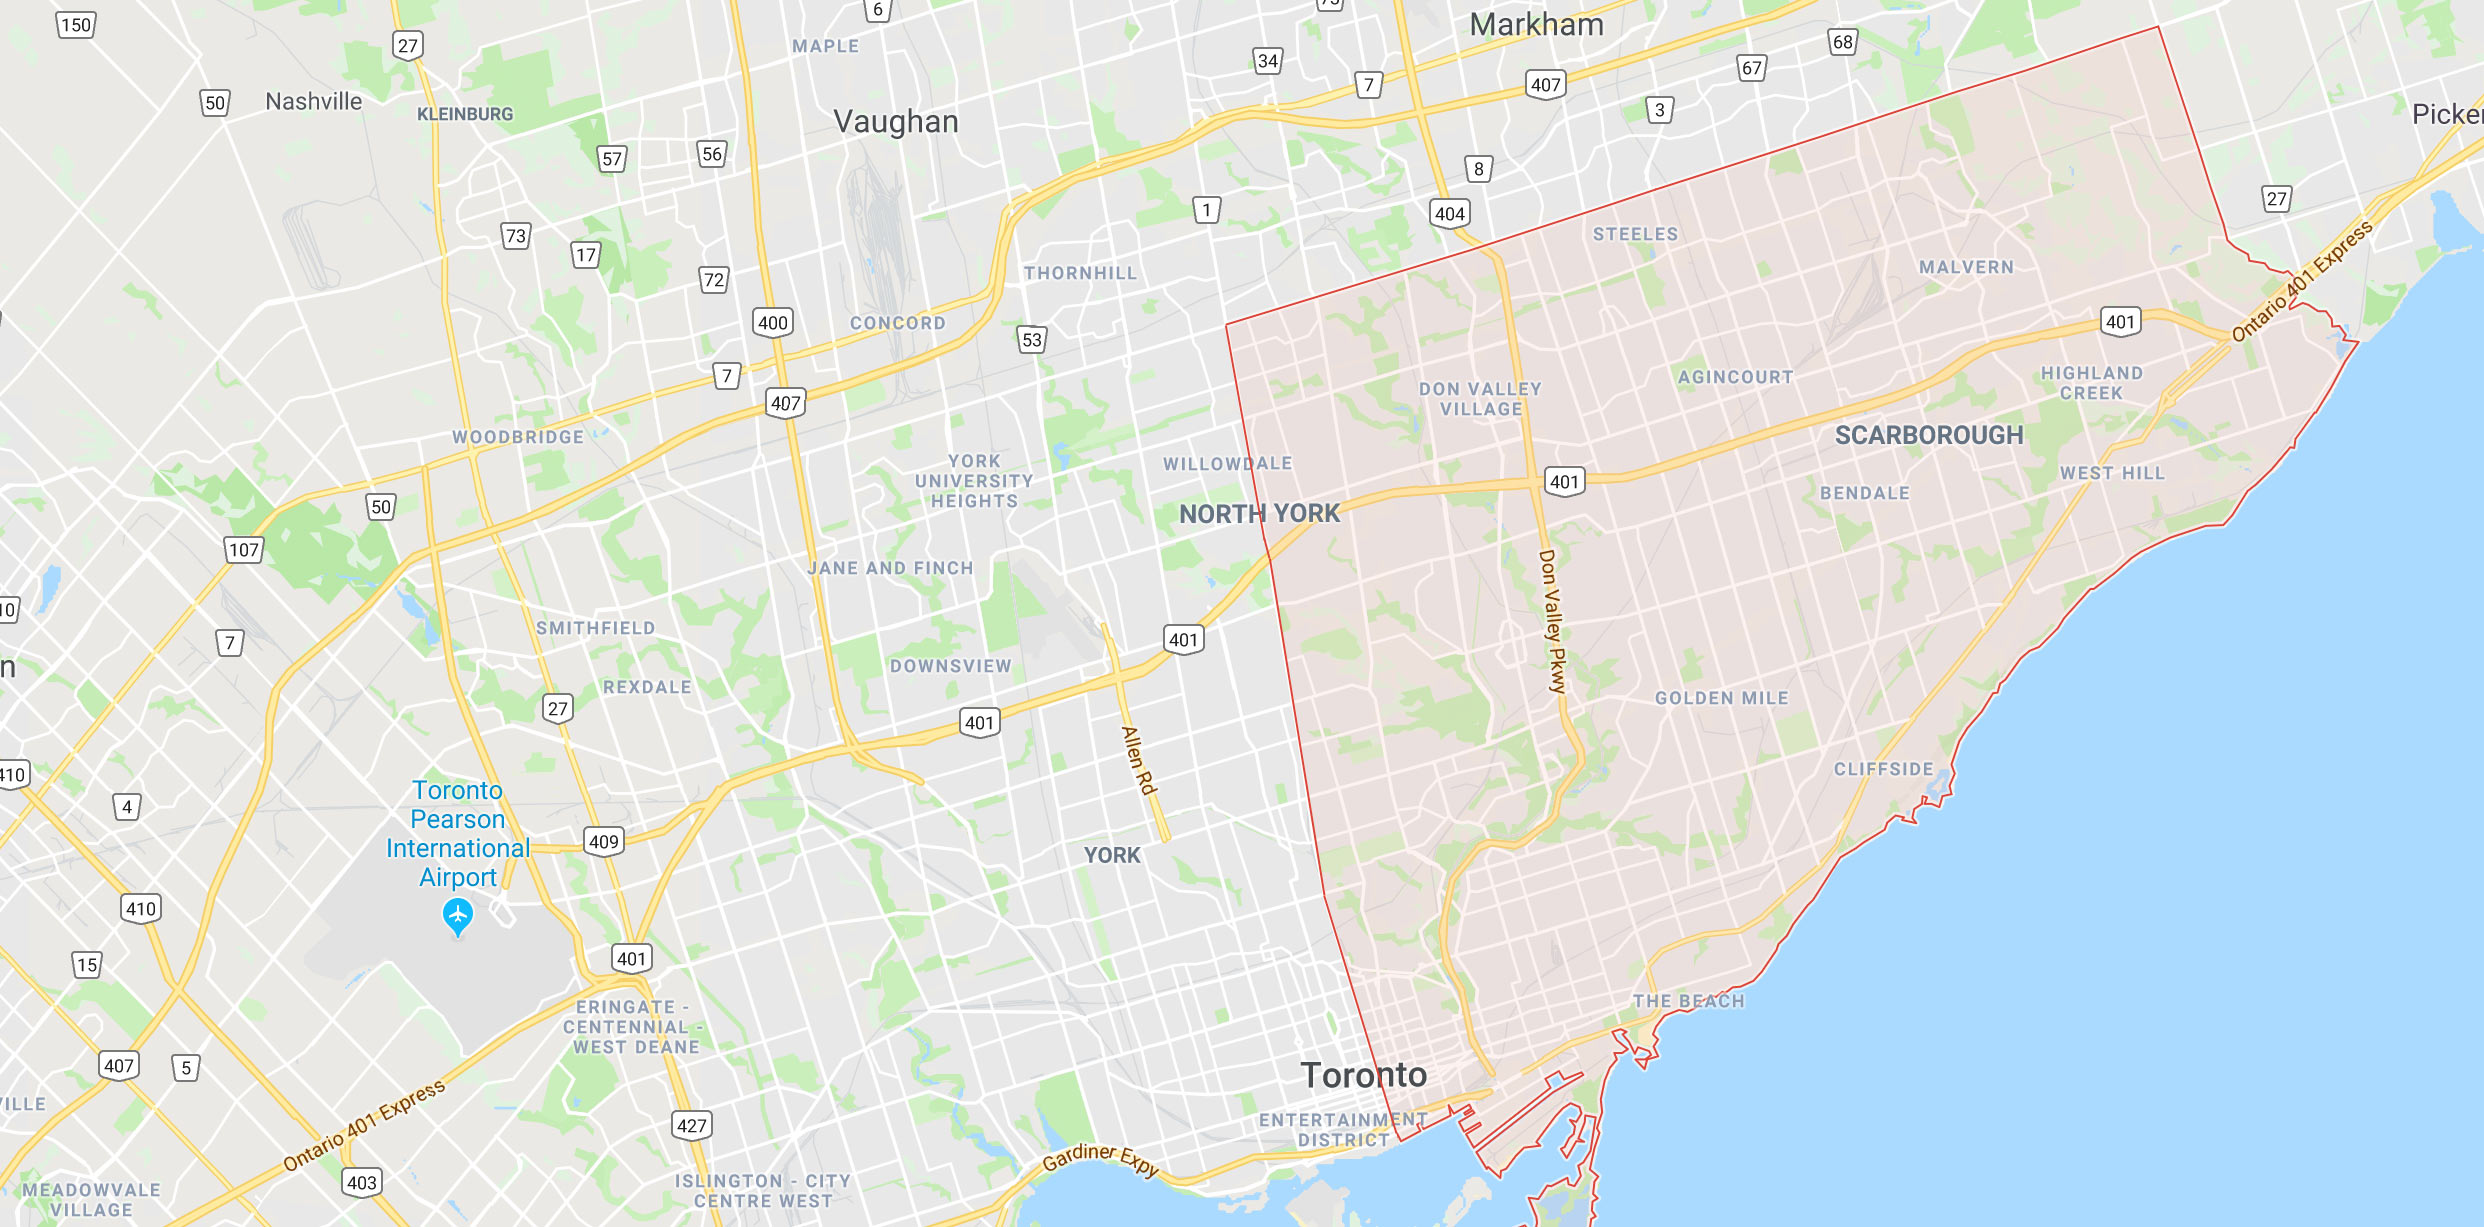 Map showing east Toronto, with Yonge Street as the western border